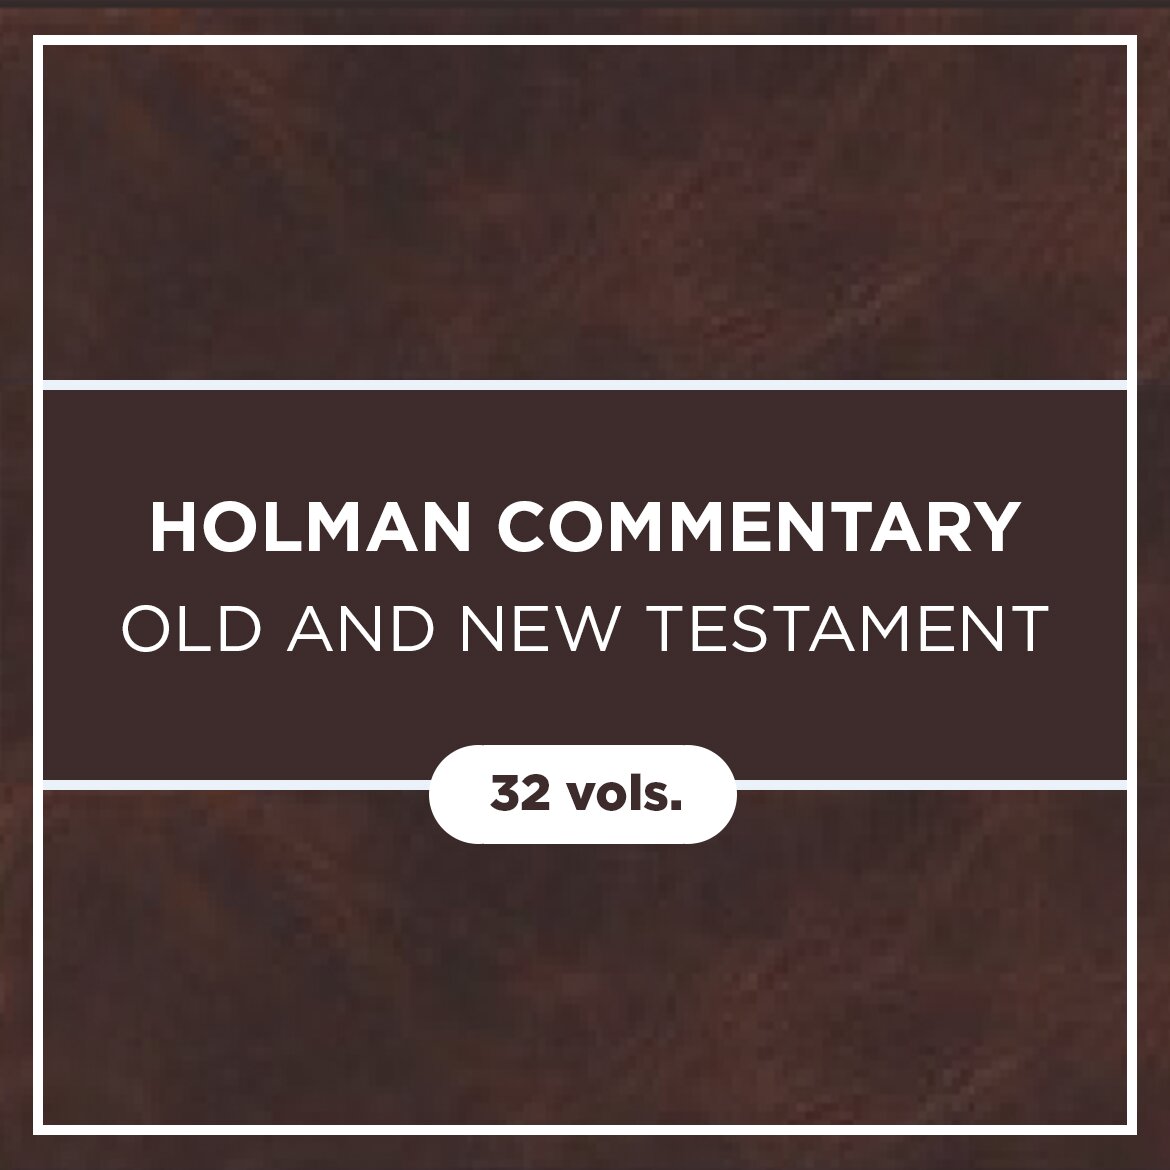 Holman Commentary: Old and New Testament (32 vols)